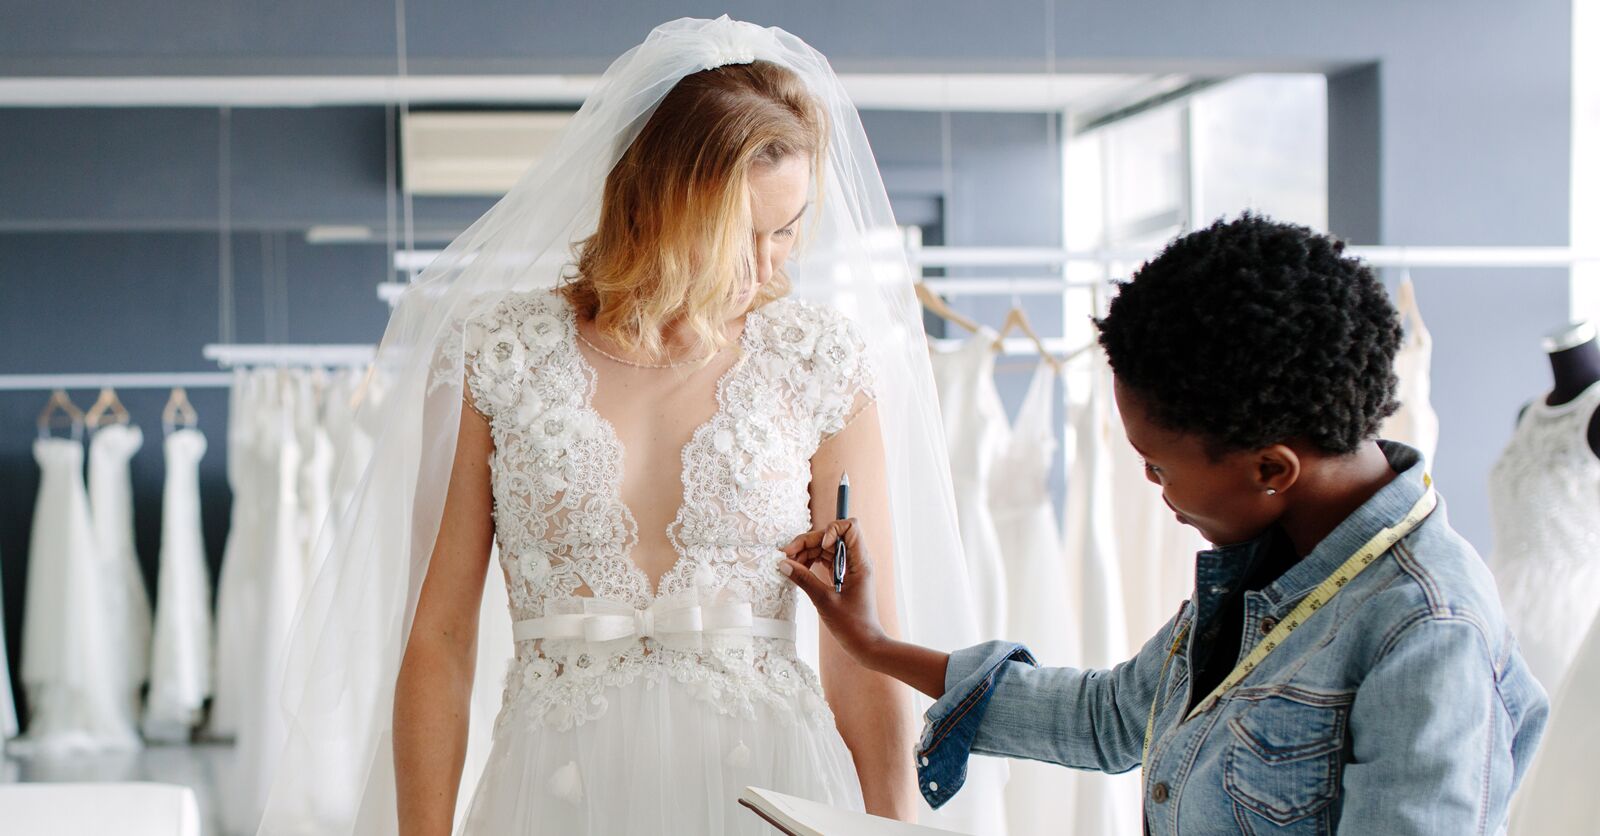 How to Find a Wedding Dress Designer You Love